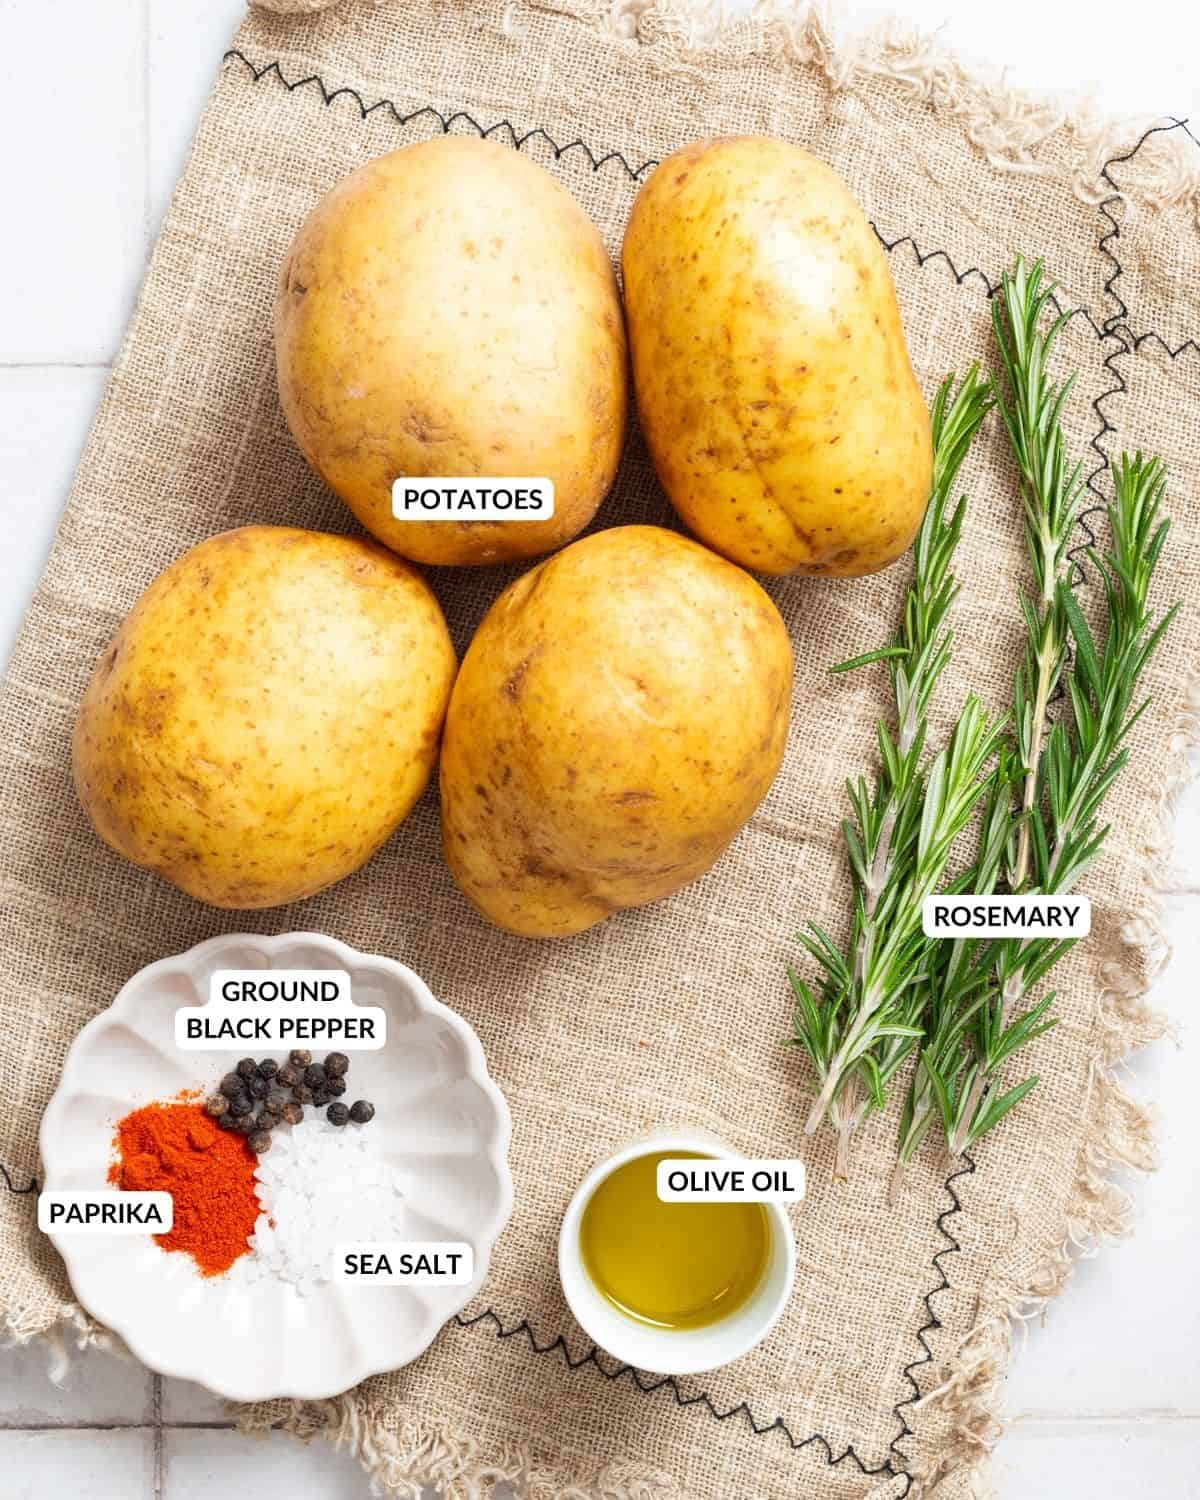 An overhead image of four russet potatoes, a spice mixture on a small plate, olive oil in a small container, and fresh rosemary twigs, with labels.